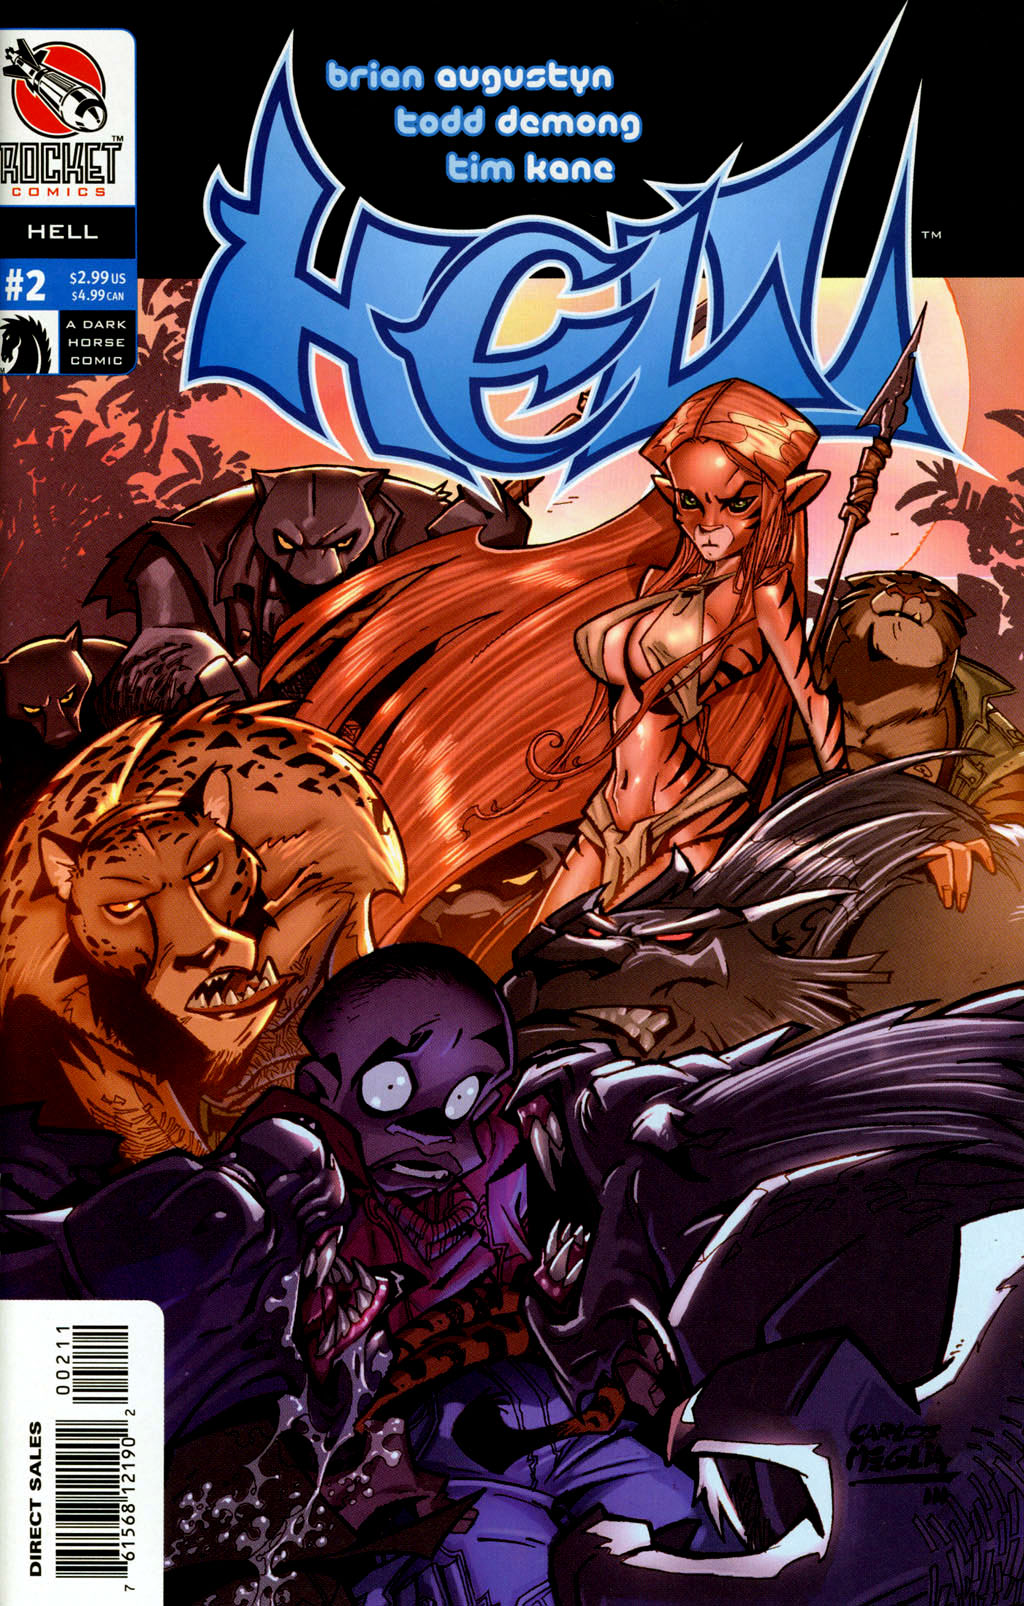 Read online Hell comic -  Issue #2 - 1